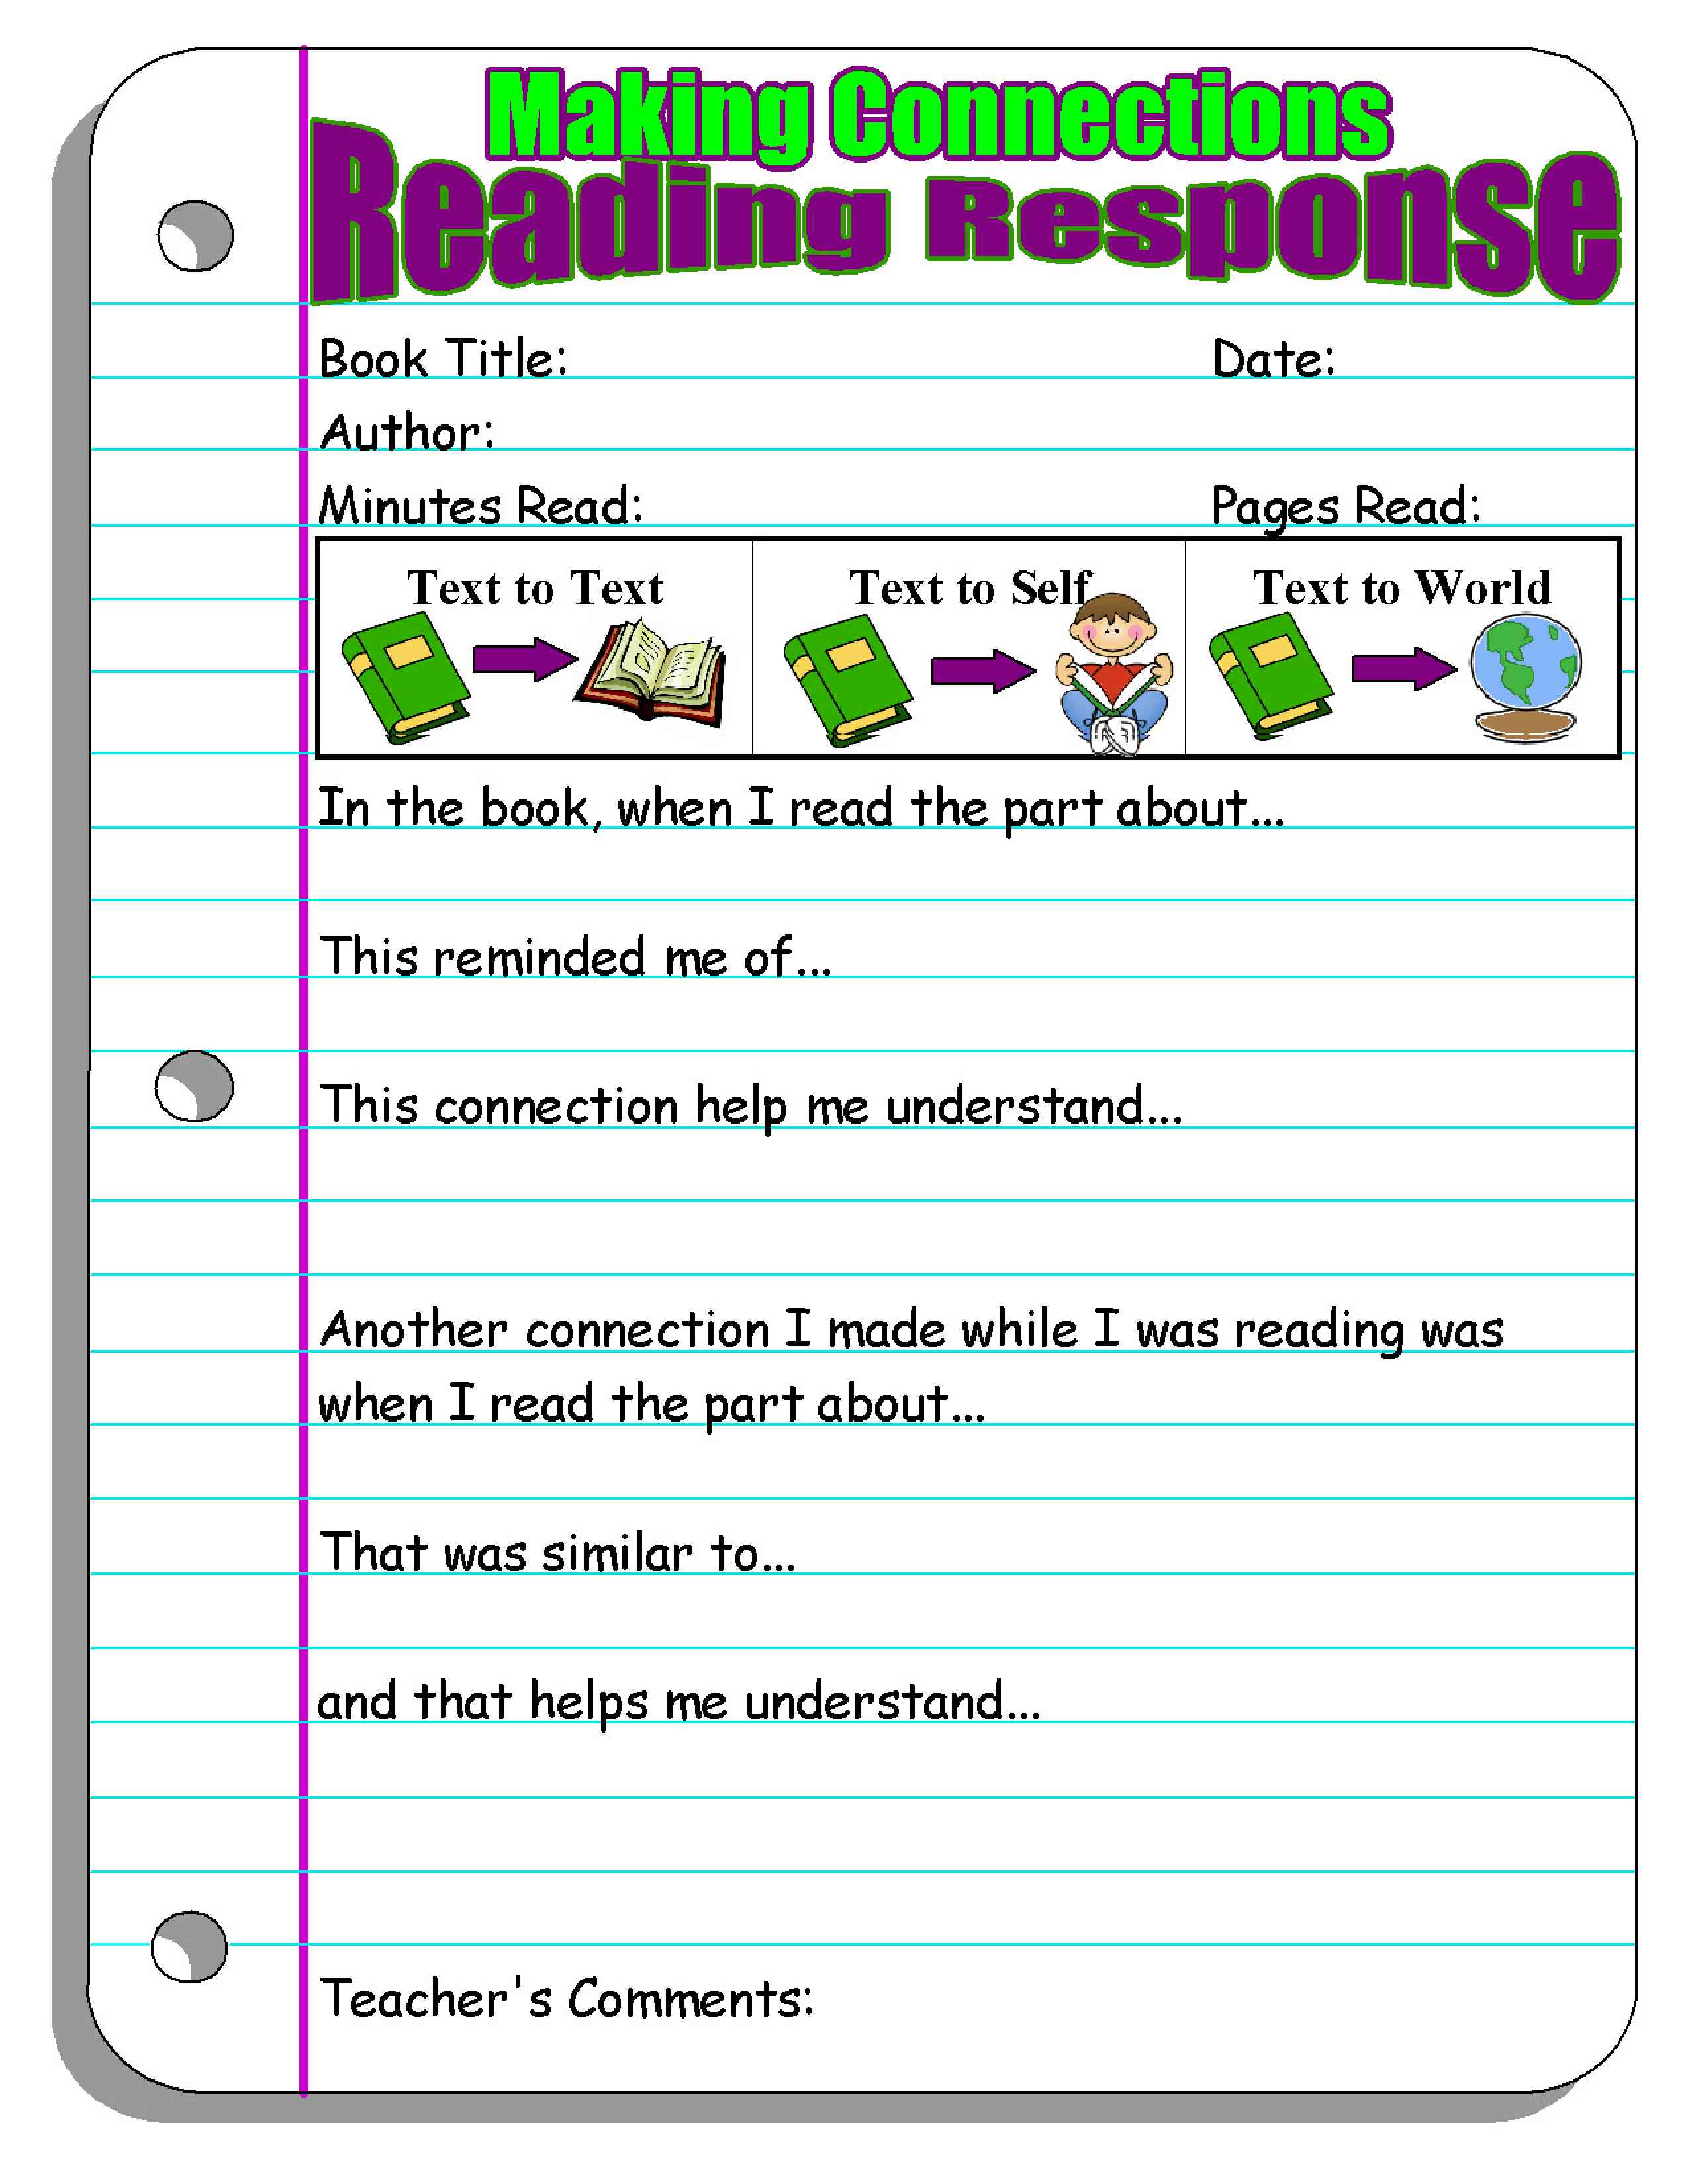 reading-response-forms-and-graphic-organizers-scholastic